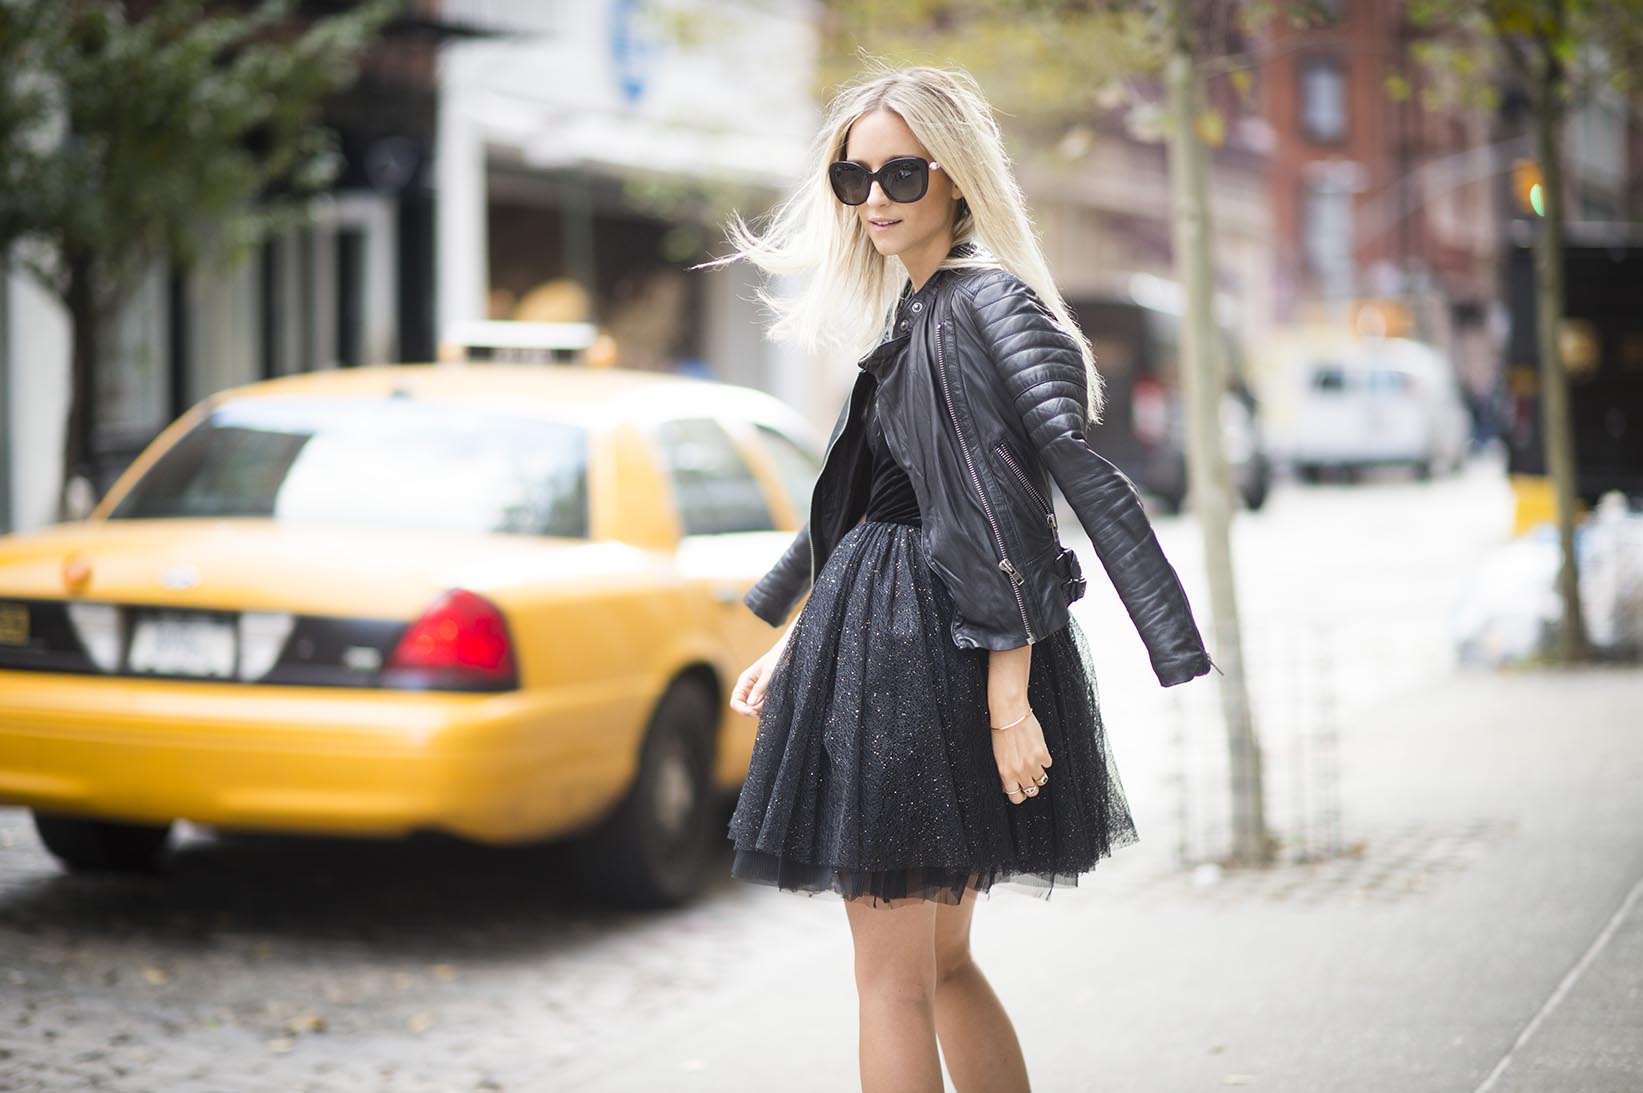 How to wear a tulle skirt in the daytime like a fashion blogger - Grazia